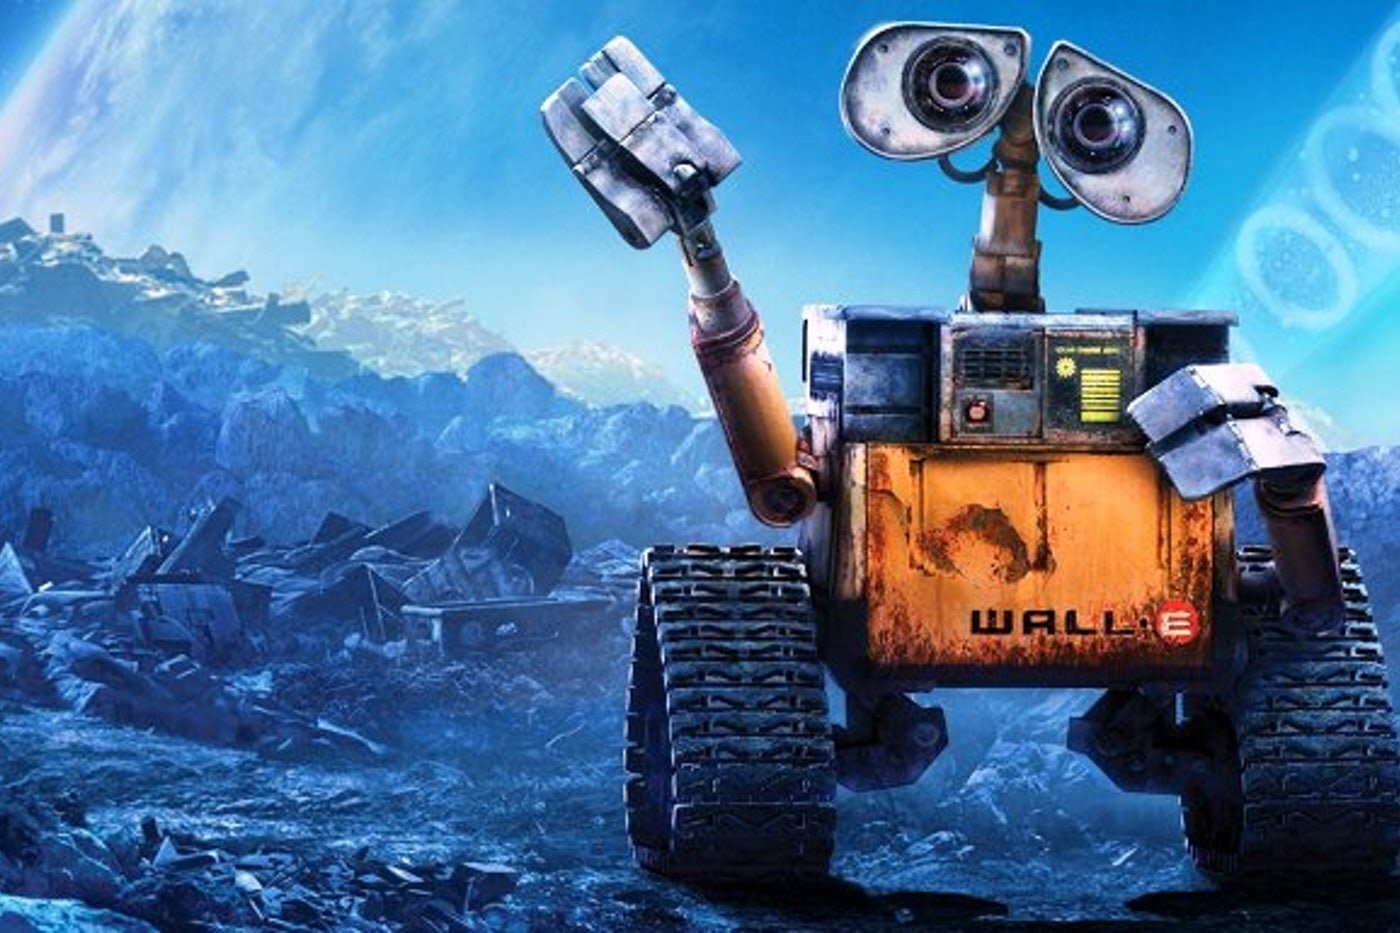 WALL-E: FILM REVIEW — The Q